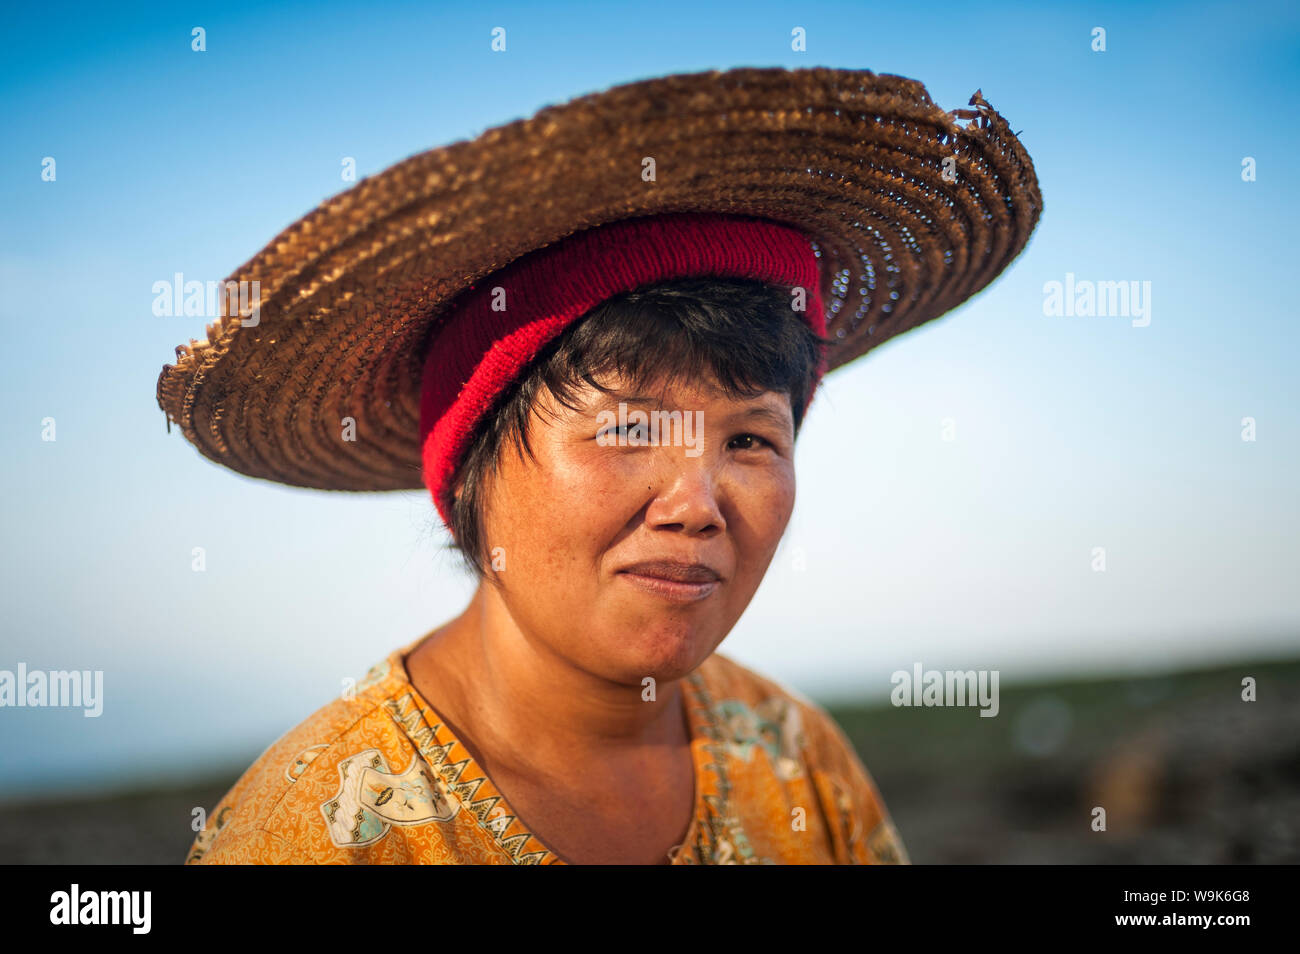 A Burmese woman panning for gold in a small stream near Putao stops to have her portrait taken, Kachin State, Myanmar (Burma), Asia Stock Photo